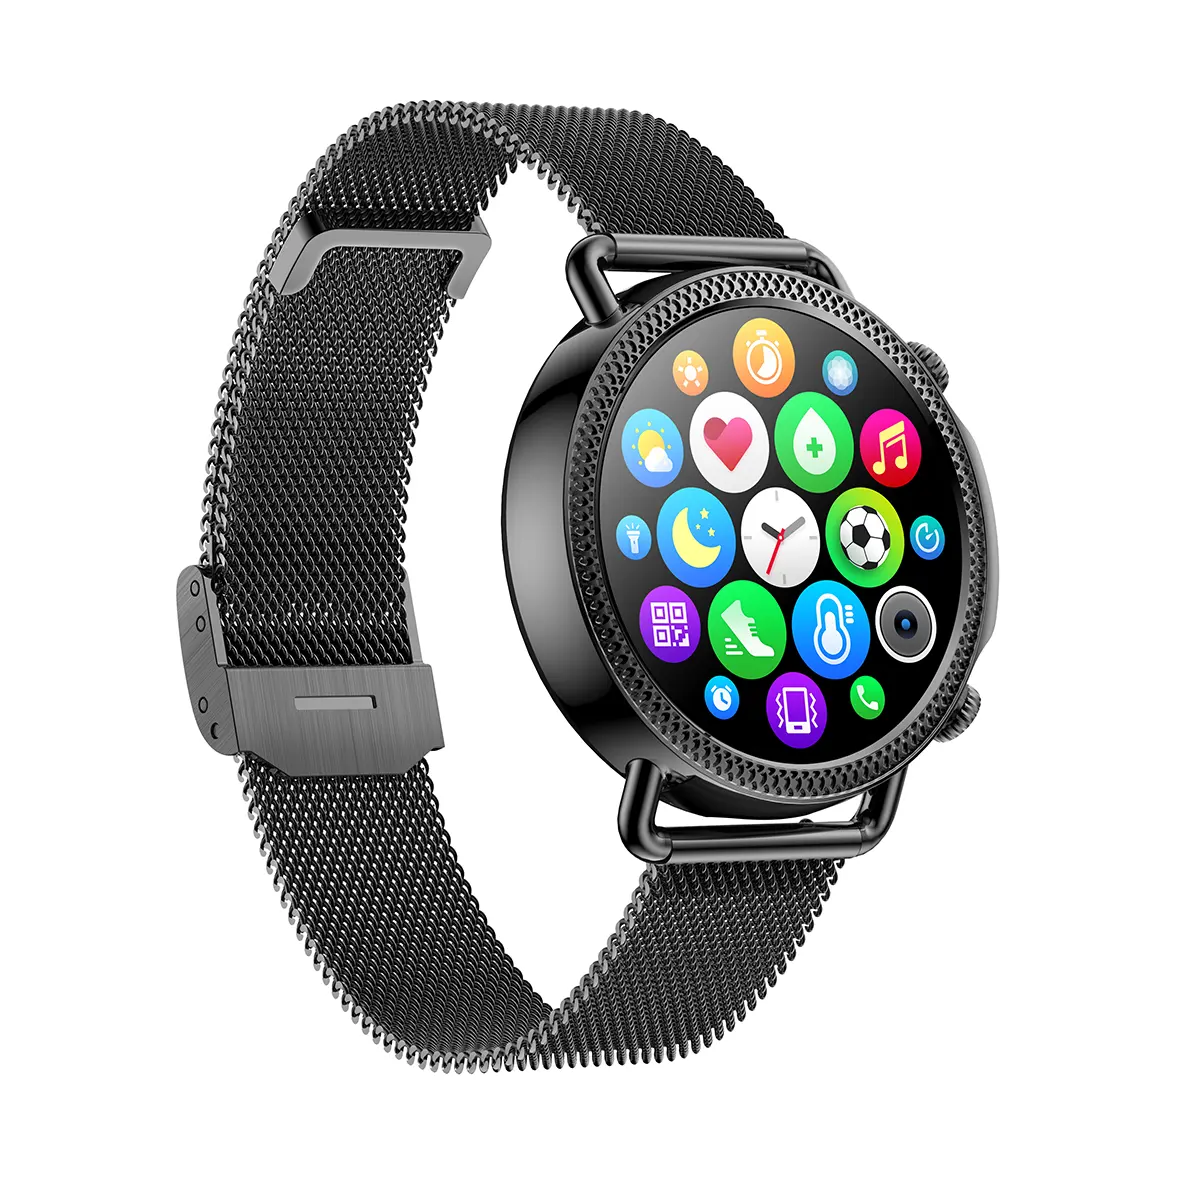 Smart watches Bracelet Full Touch Fashion Health Monitoring Waterproof Sports Smart Watches Bracelet Metal